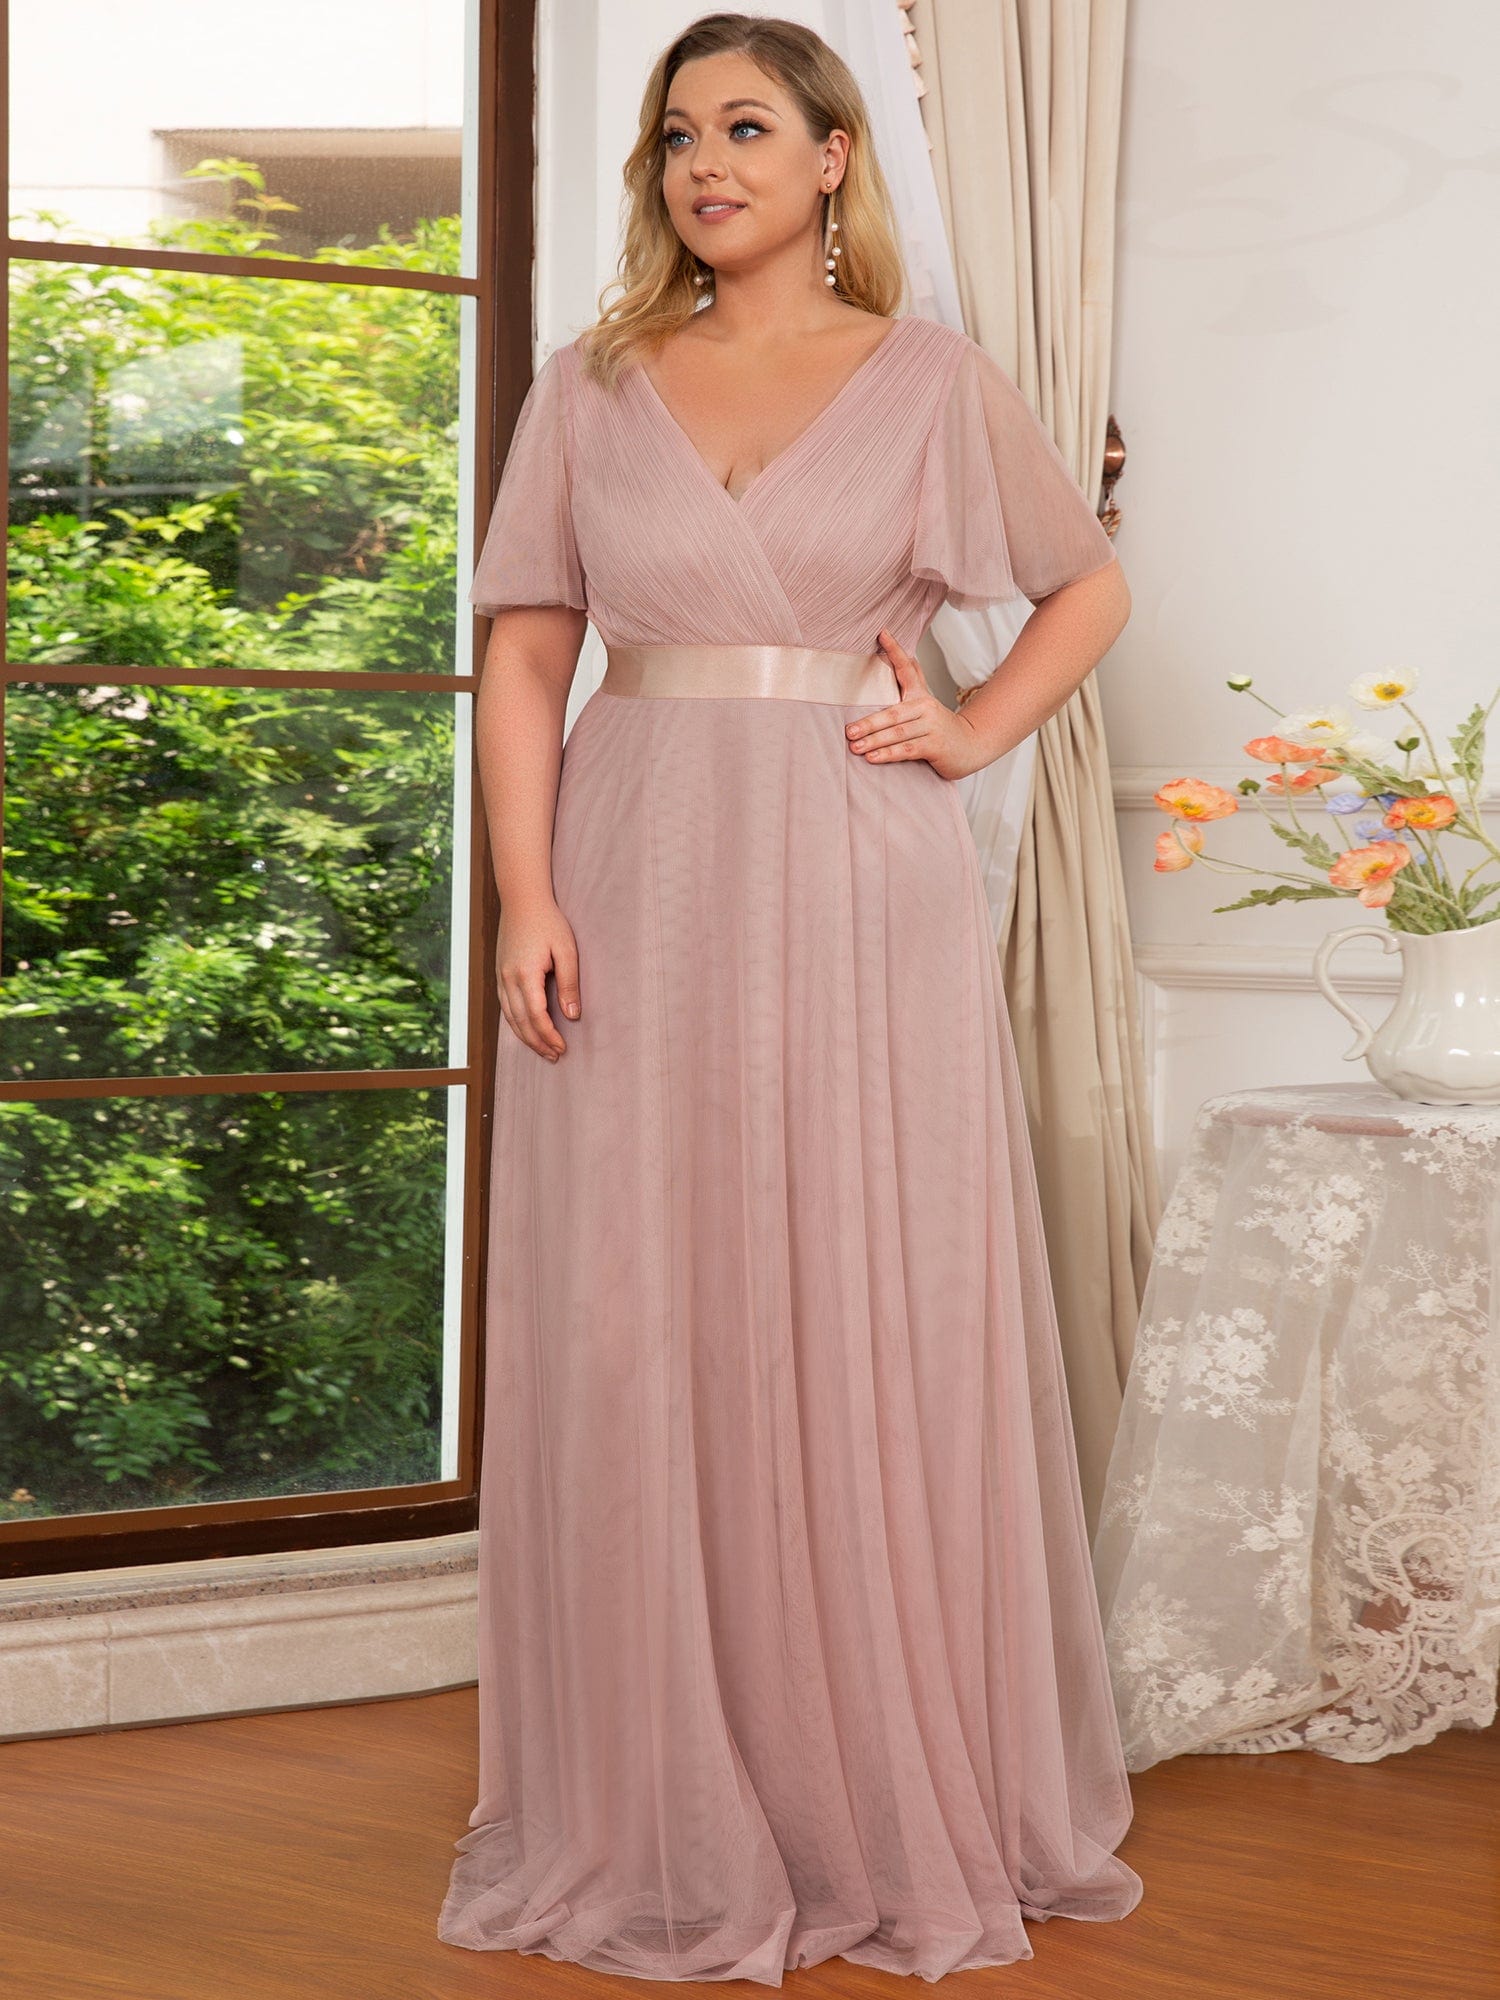 Tulle Bridesmaid Dresses for Women Plus Size Maxi Long - Ever-Pretty US